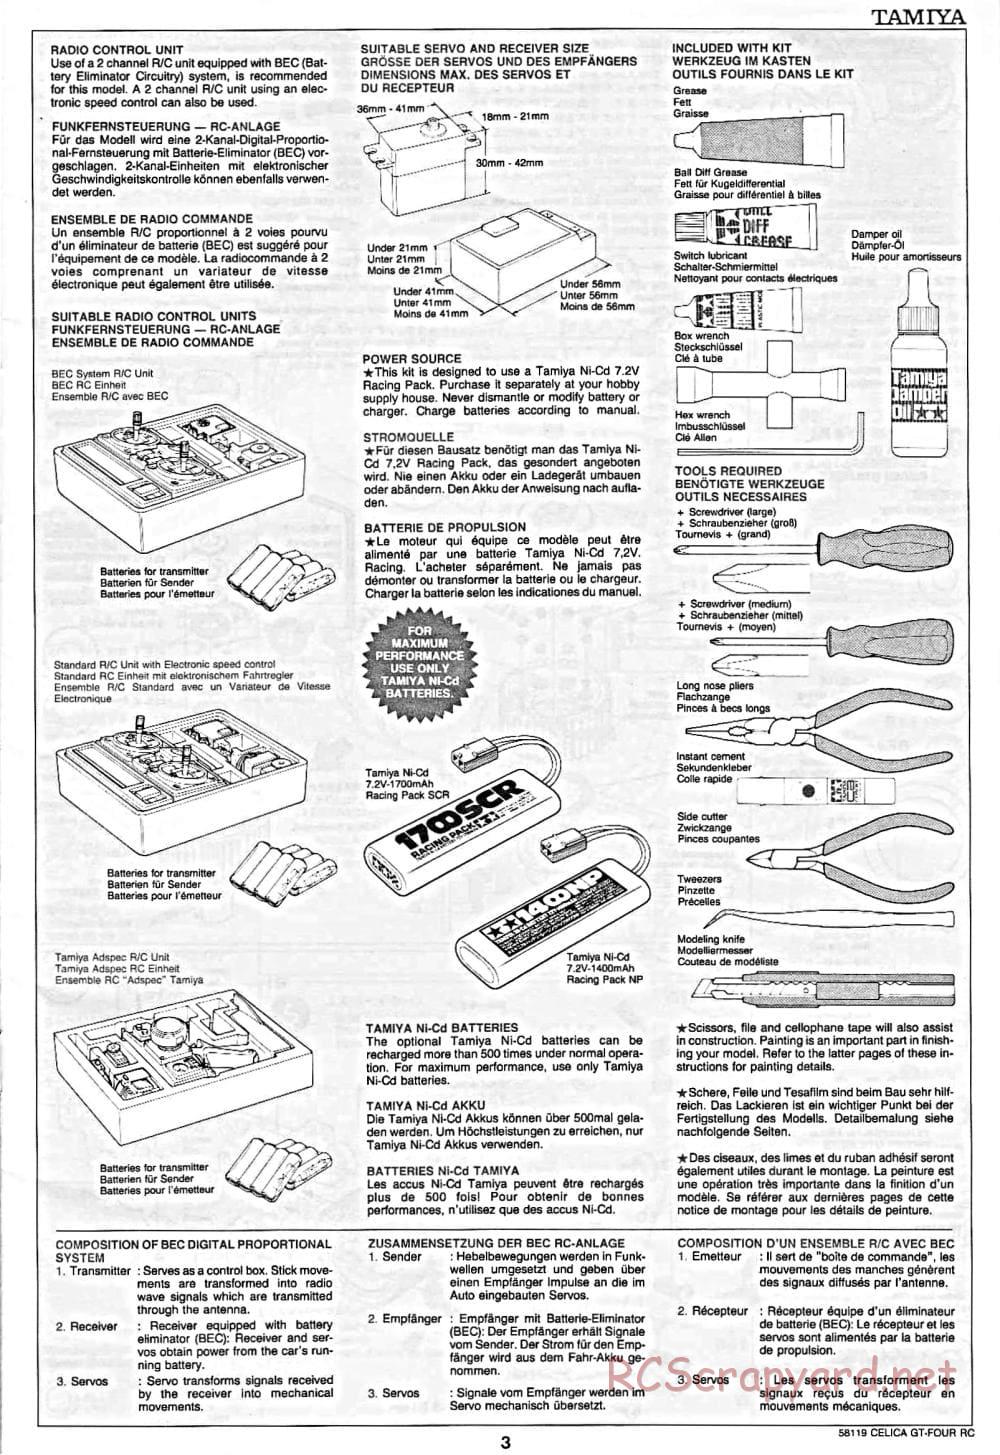 Tamiya - Toyota Celica GT-Four RC - TA-01 Chassis - Manual - Page 3